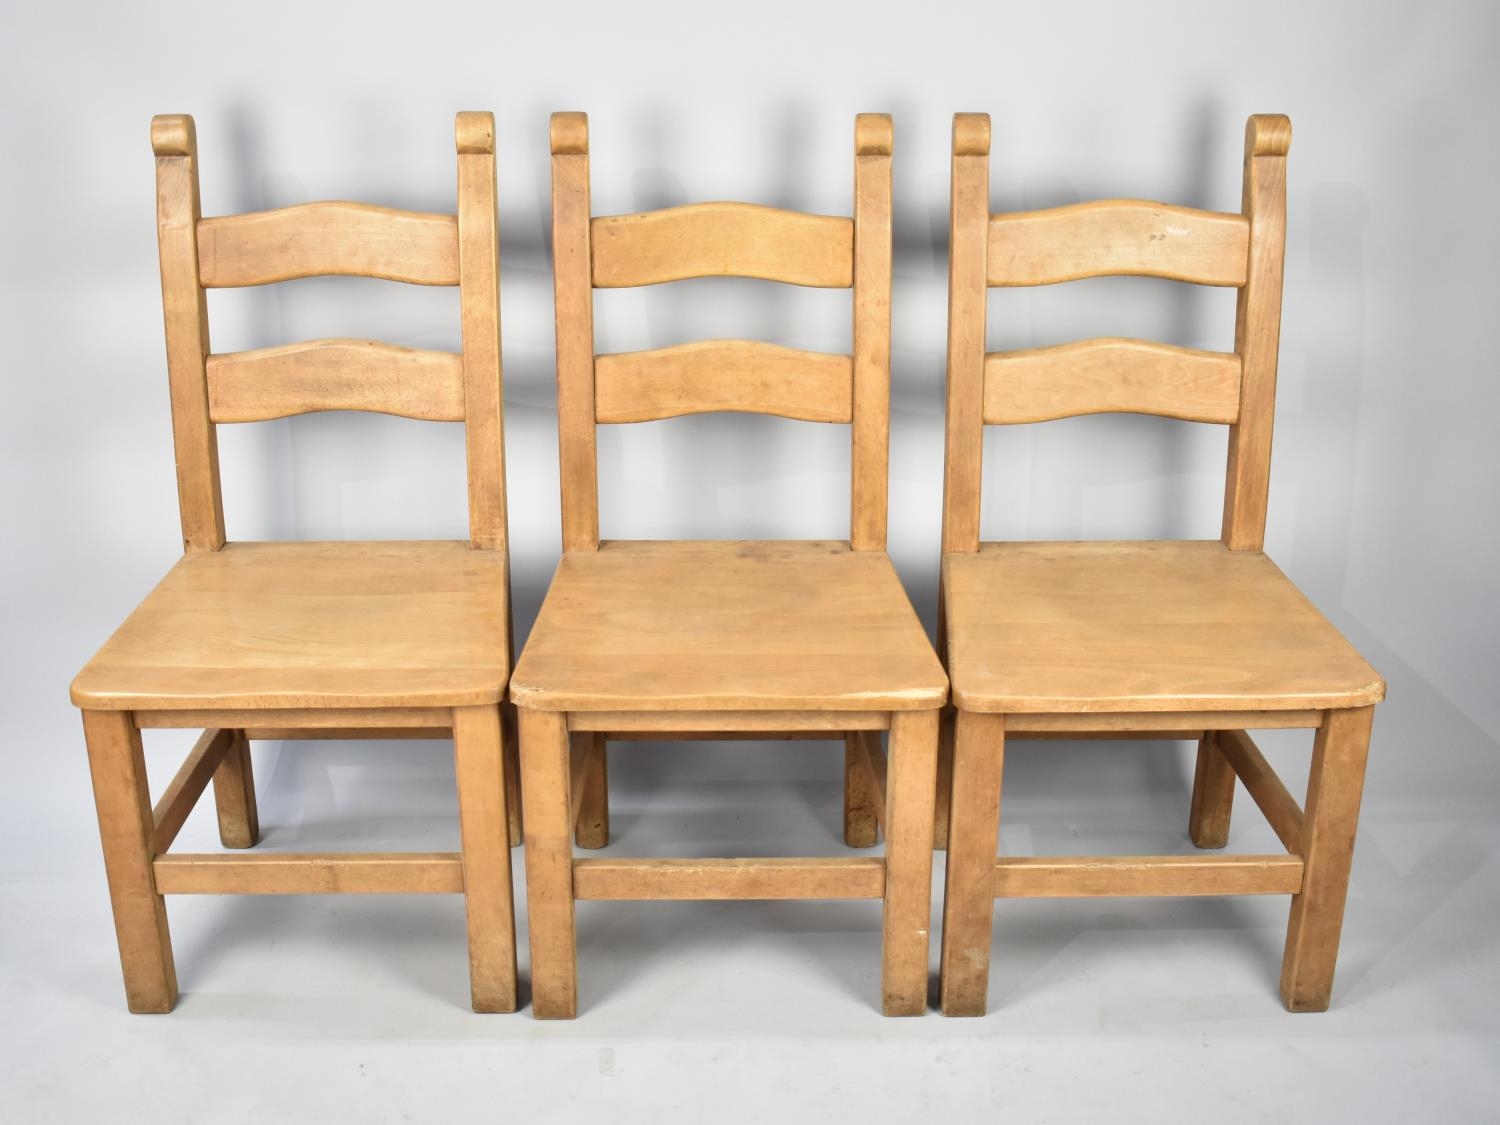 A Set of Three Hardwood Ladder Back Dining Chairs